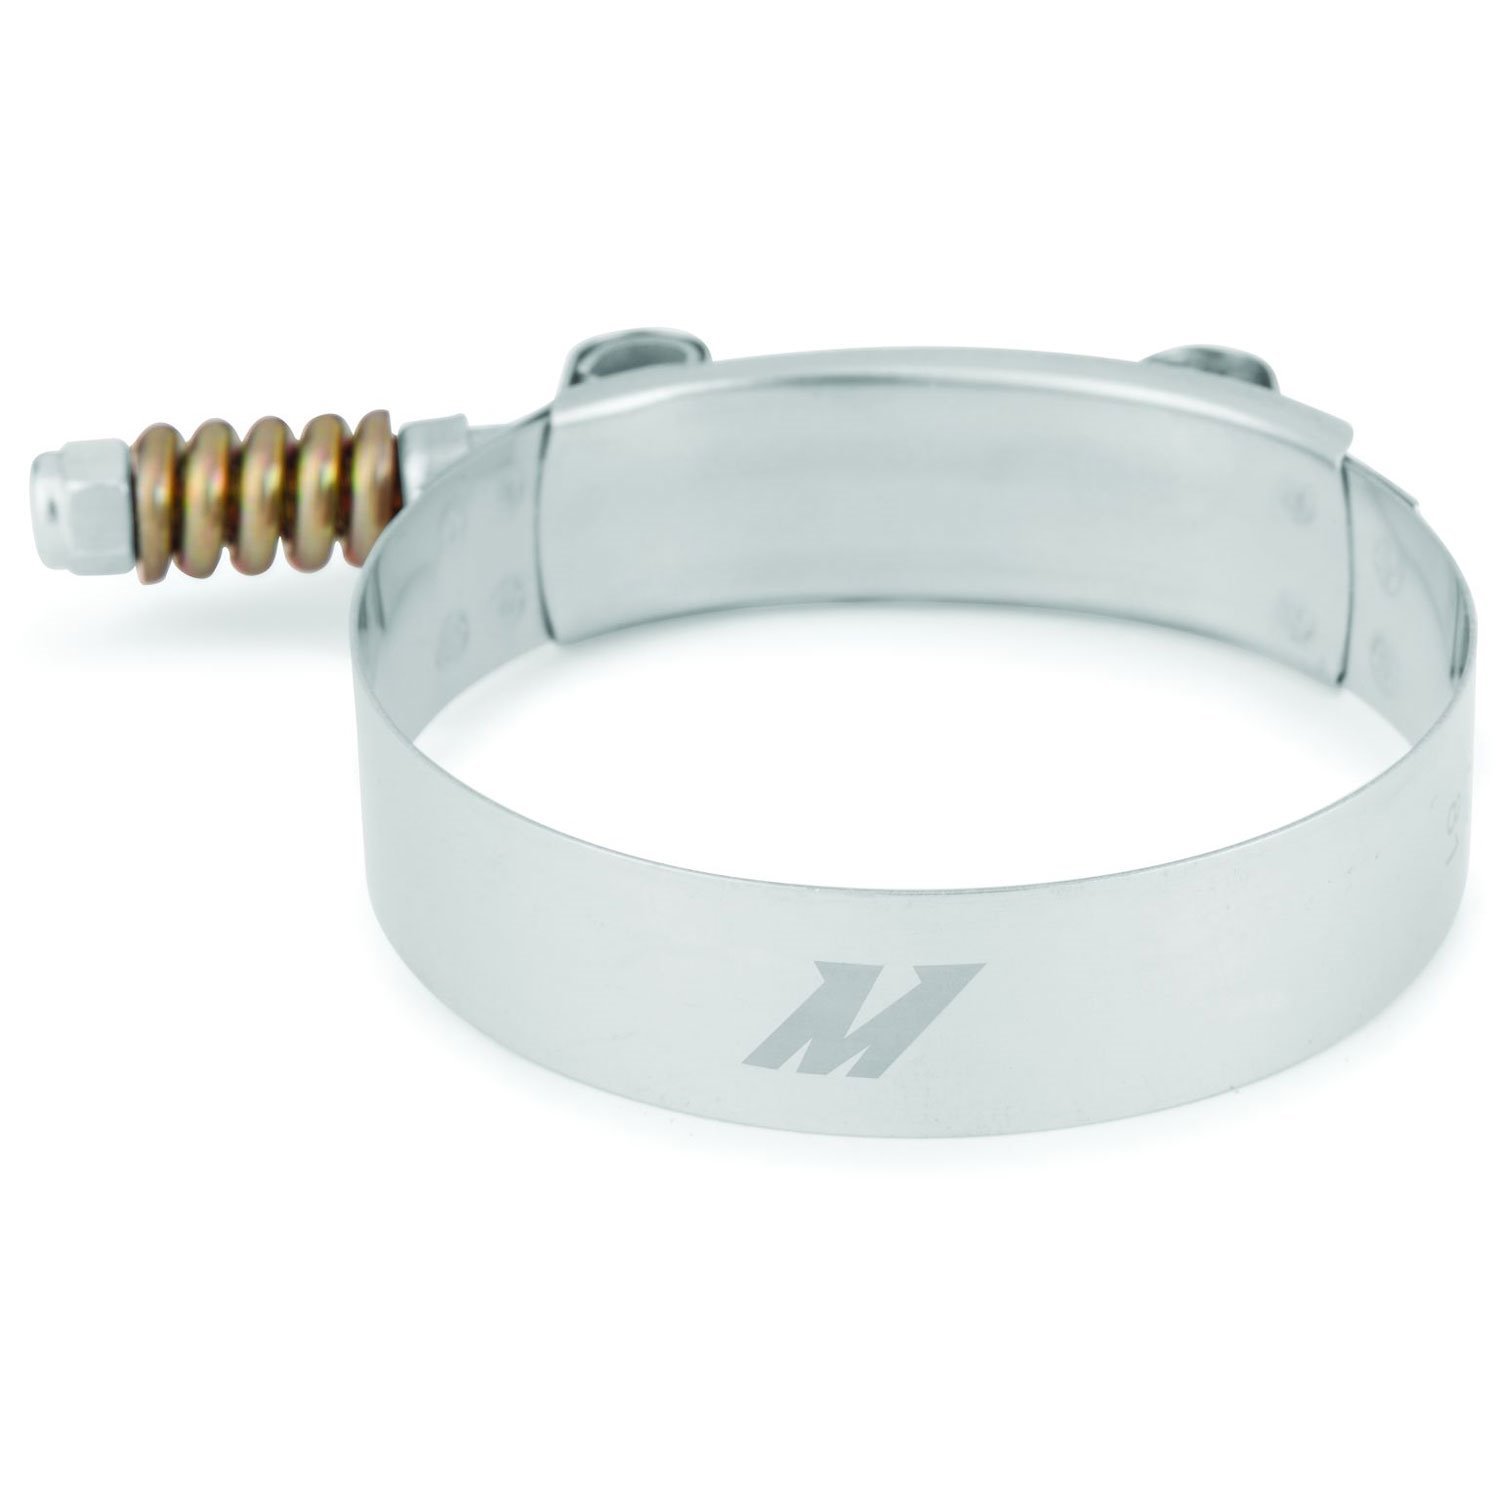 3.0" Constant Tension T-Bolt Hose Clamp 2.87" (73mm) to 3.19" (81mm) Clamping Range